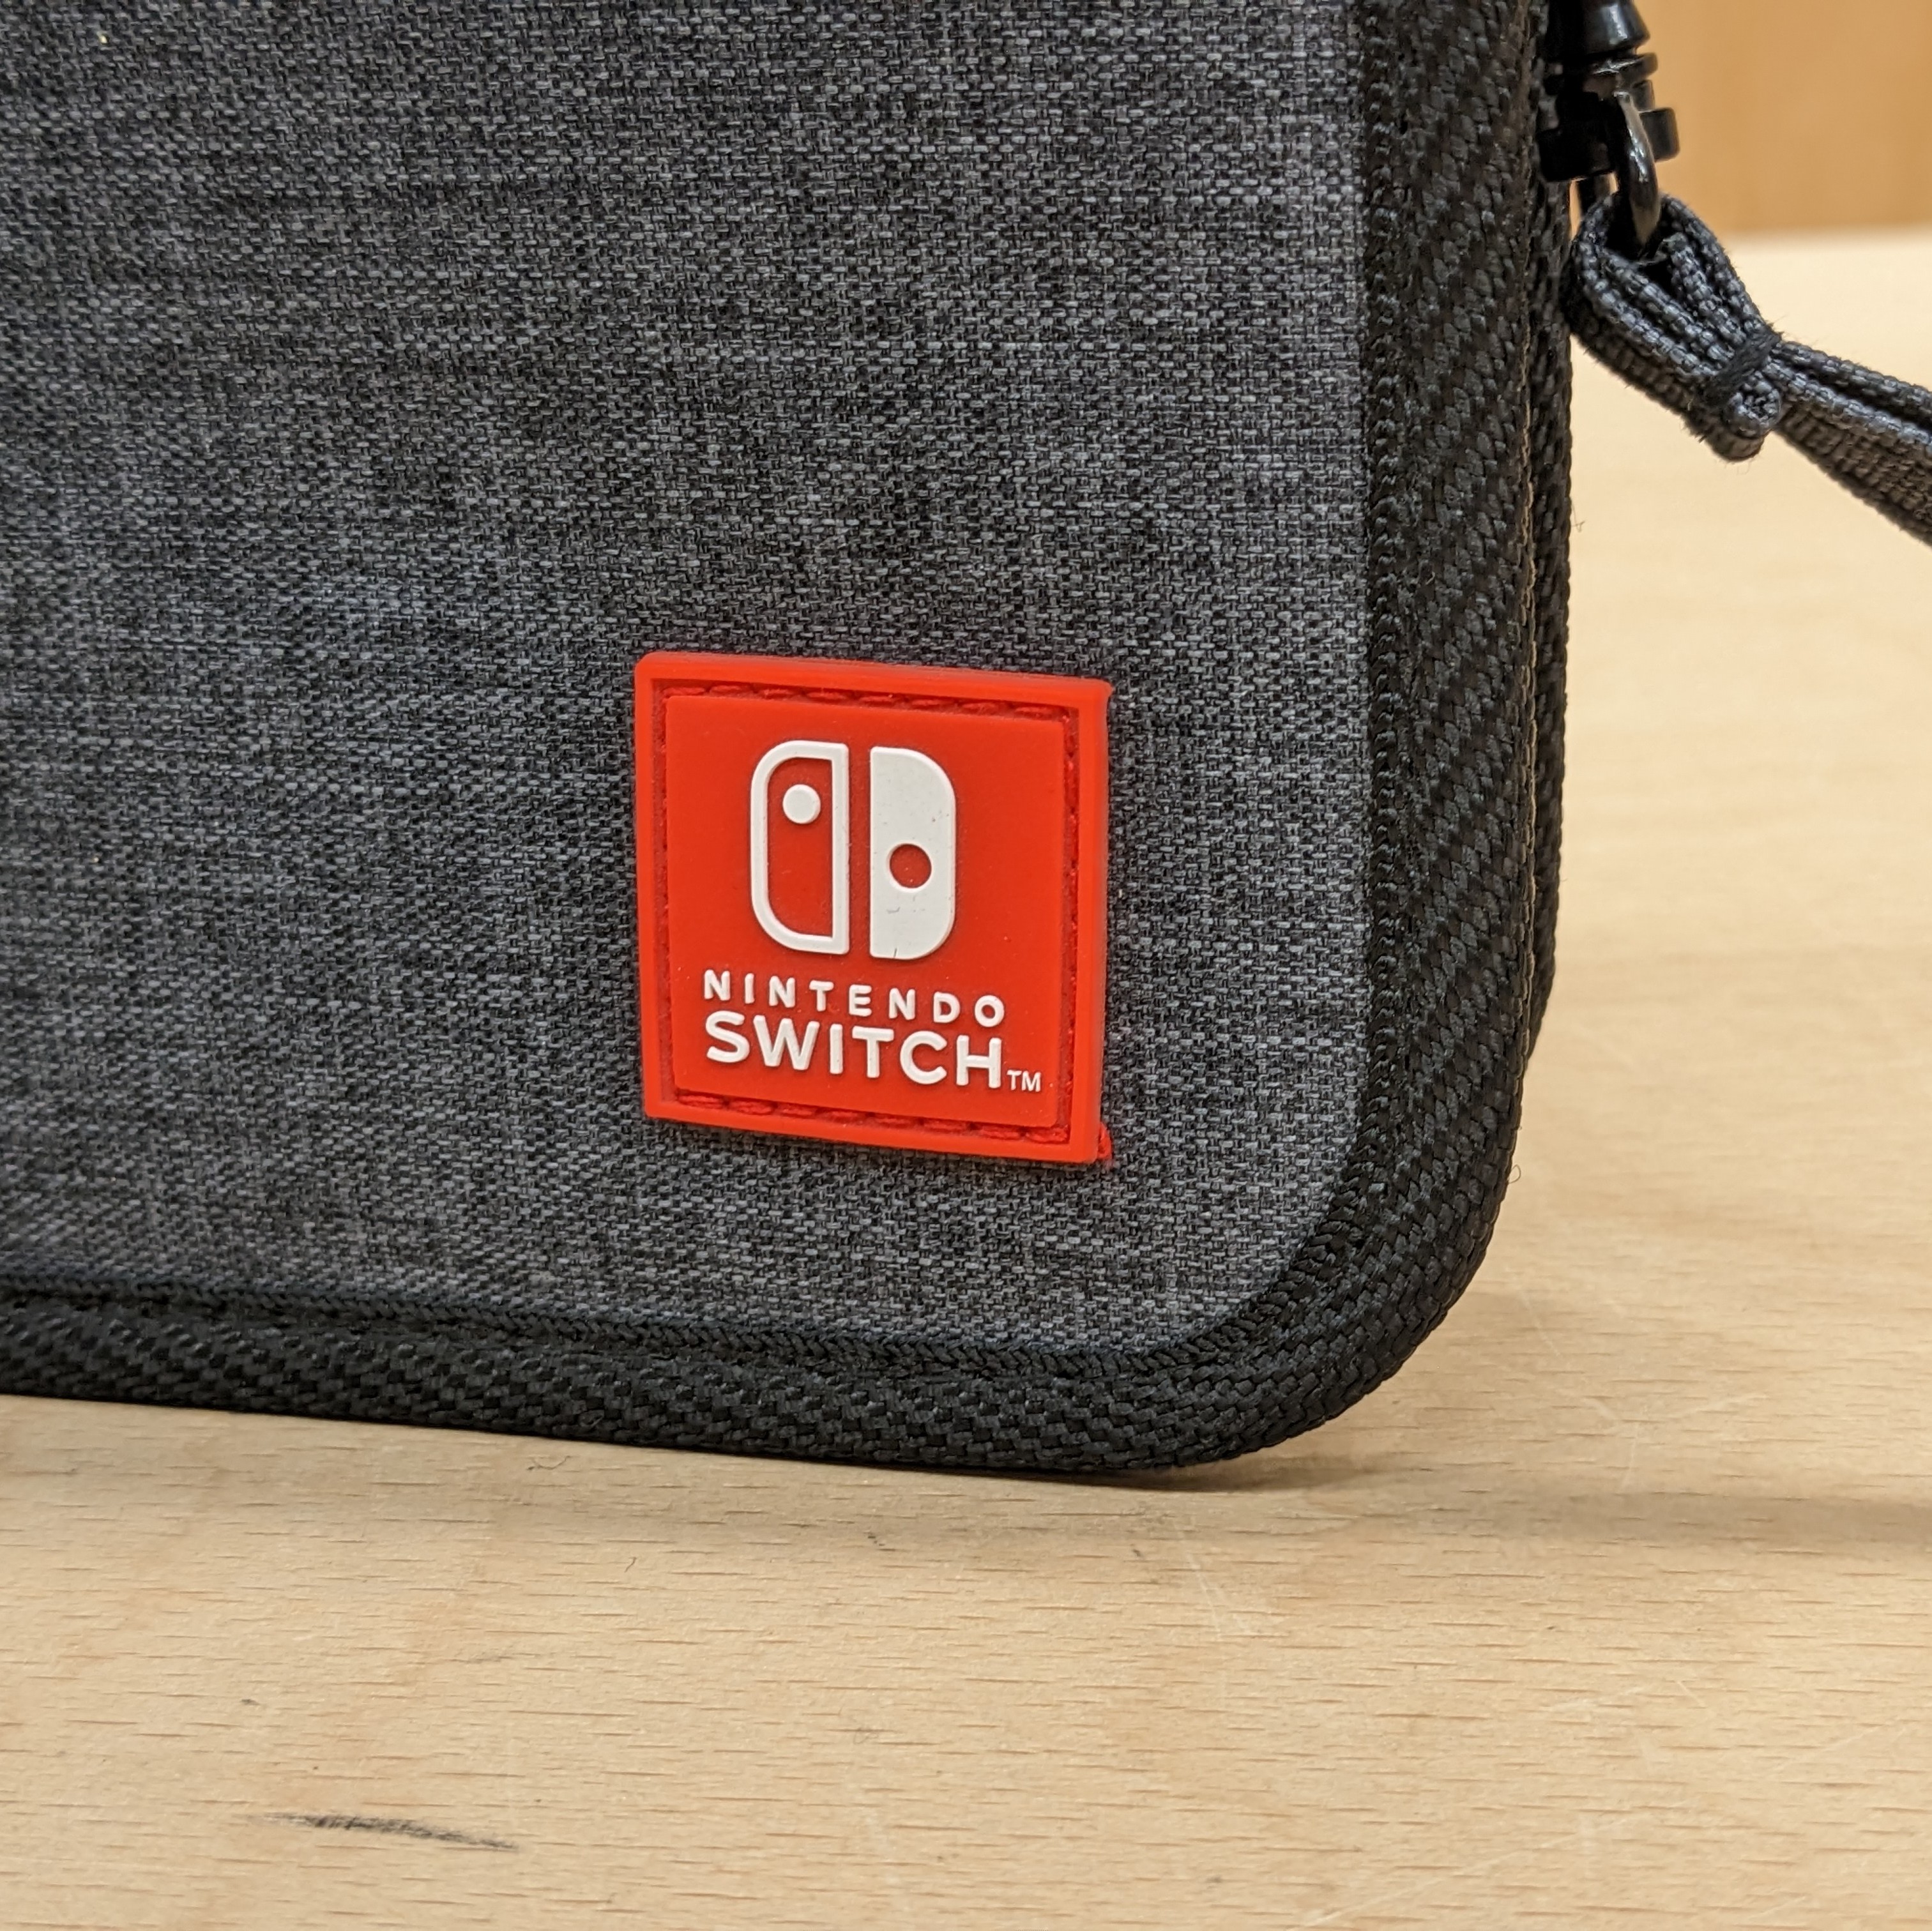 Nintendo switch official carry case close up rubber red badge